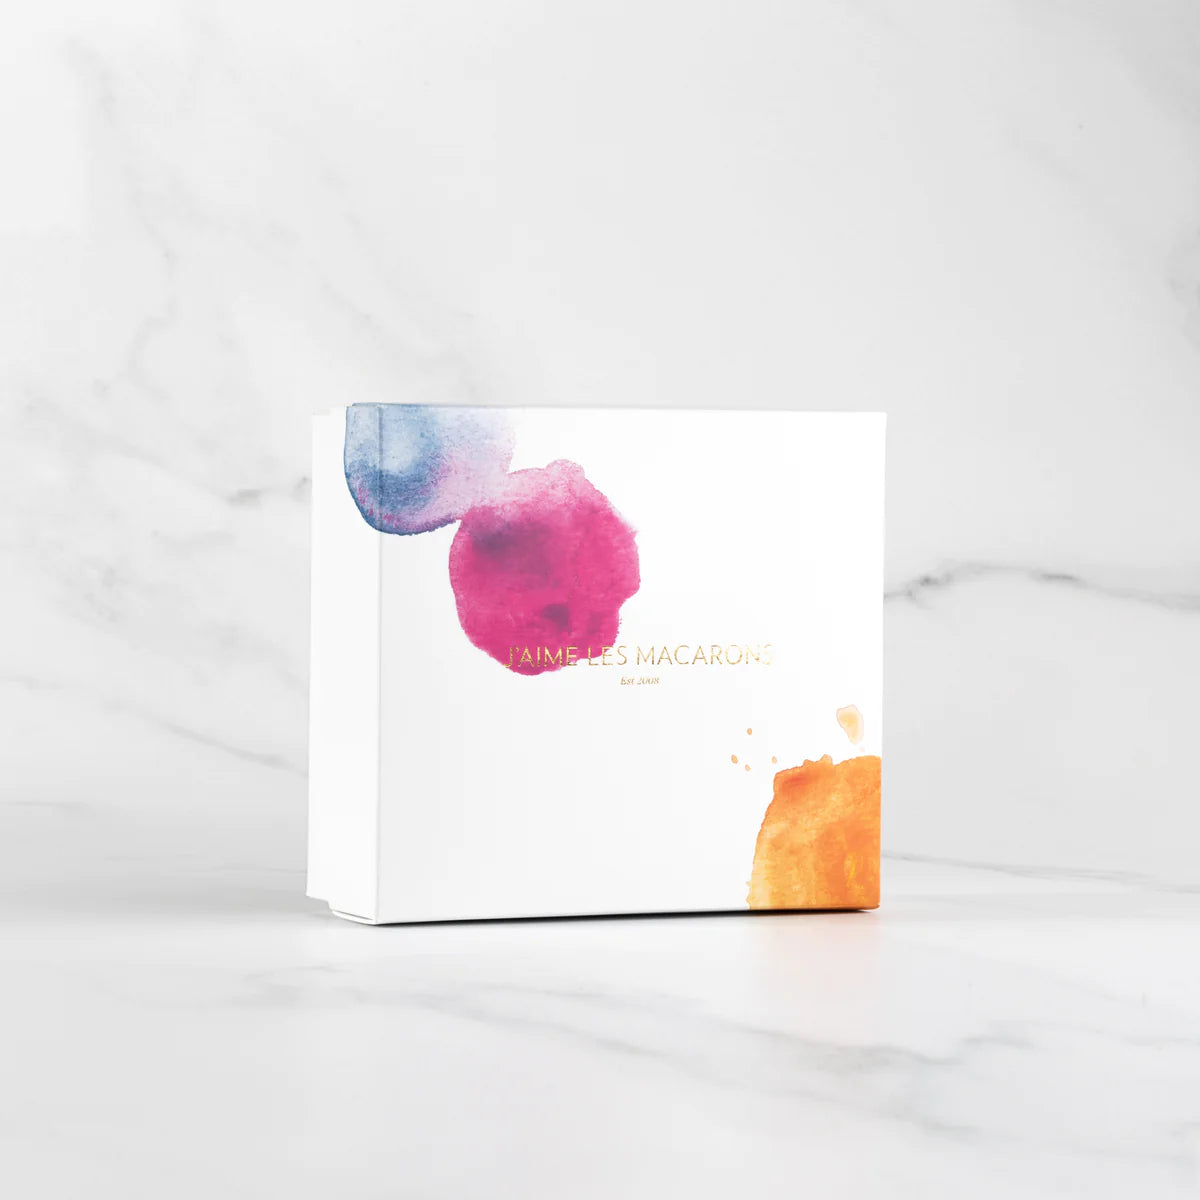 A minimalist and elegant handmade Box of 12 Macarons by J'aime les Macarons packaging design with watercolor accents on a marble background, crafted in Christchurch, New Zealand.